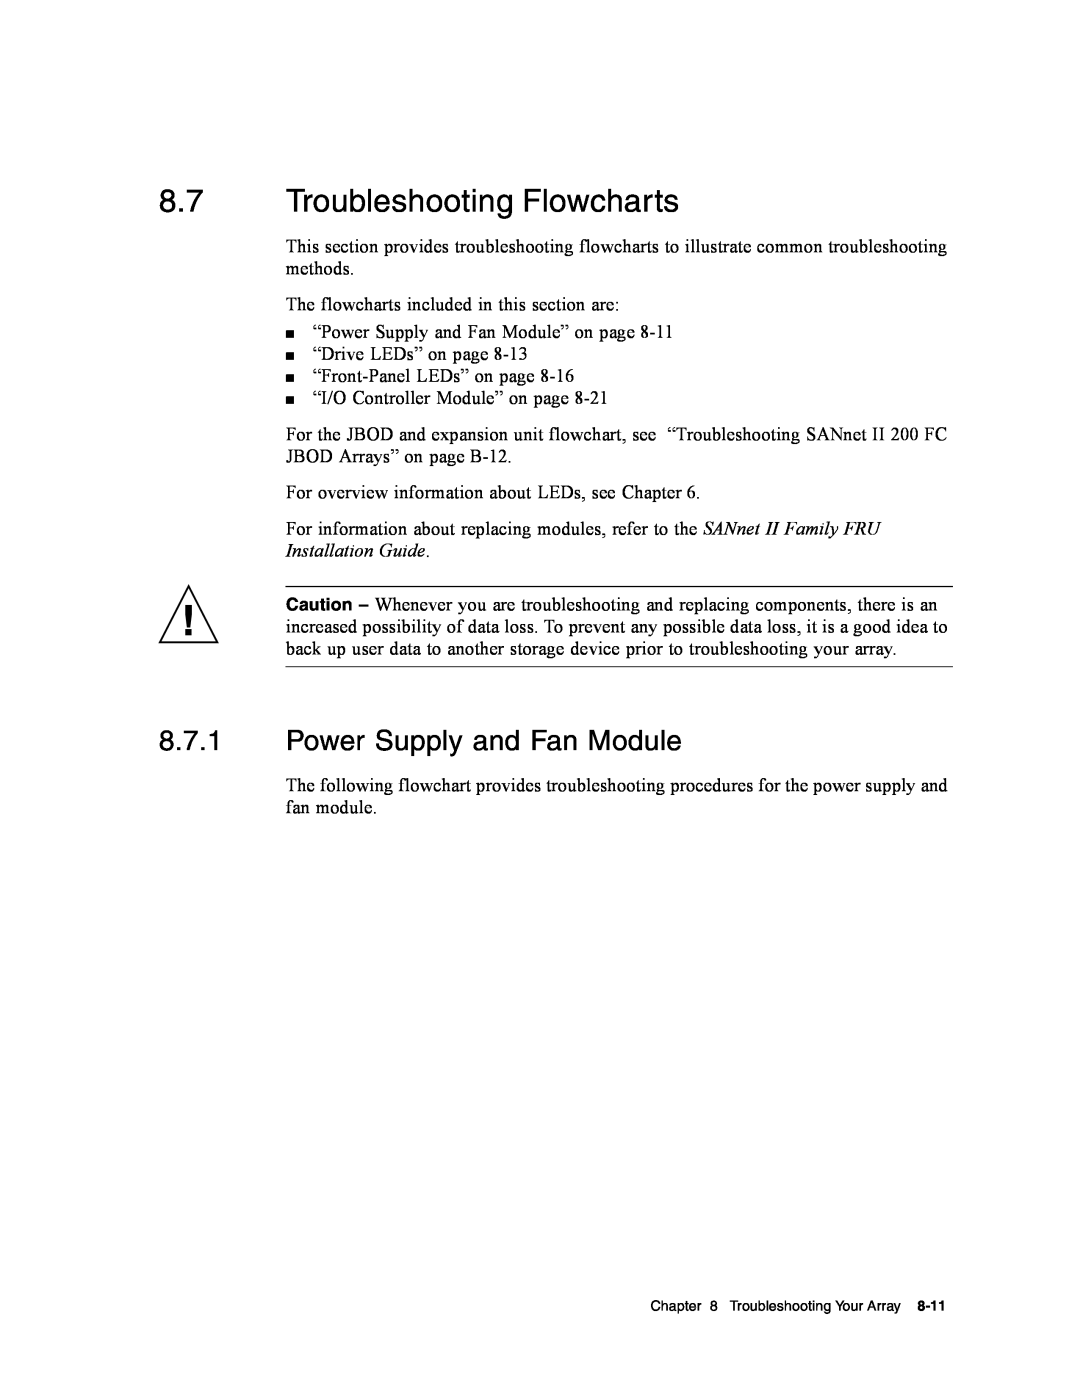 Dot Hill Systems II 200 FC service manual Troubleshooting Flowcharts, Power Supply and Fan Module 